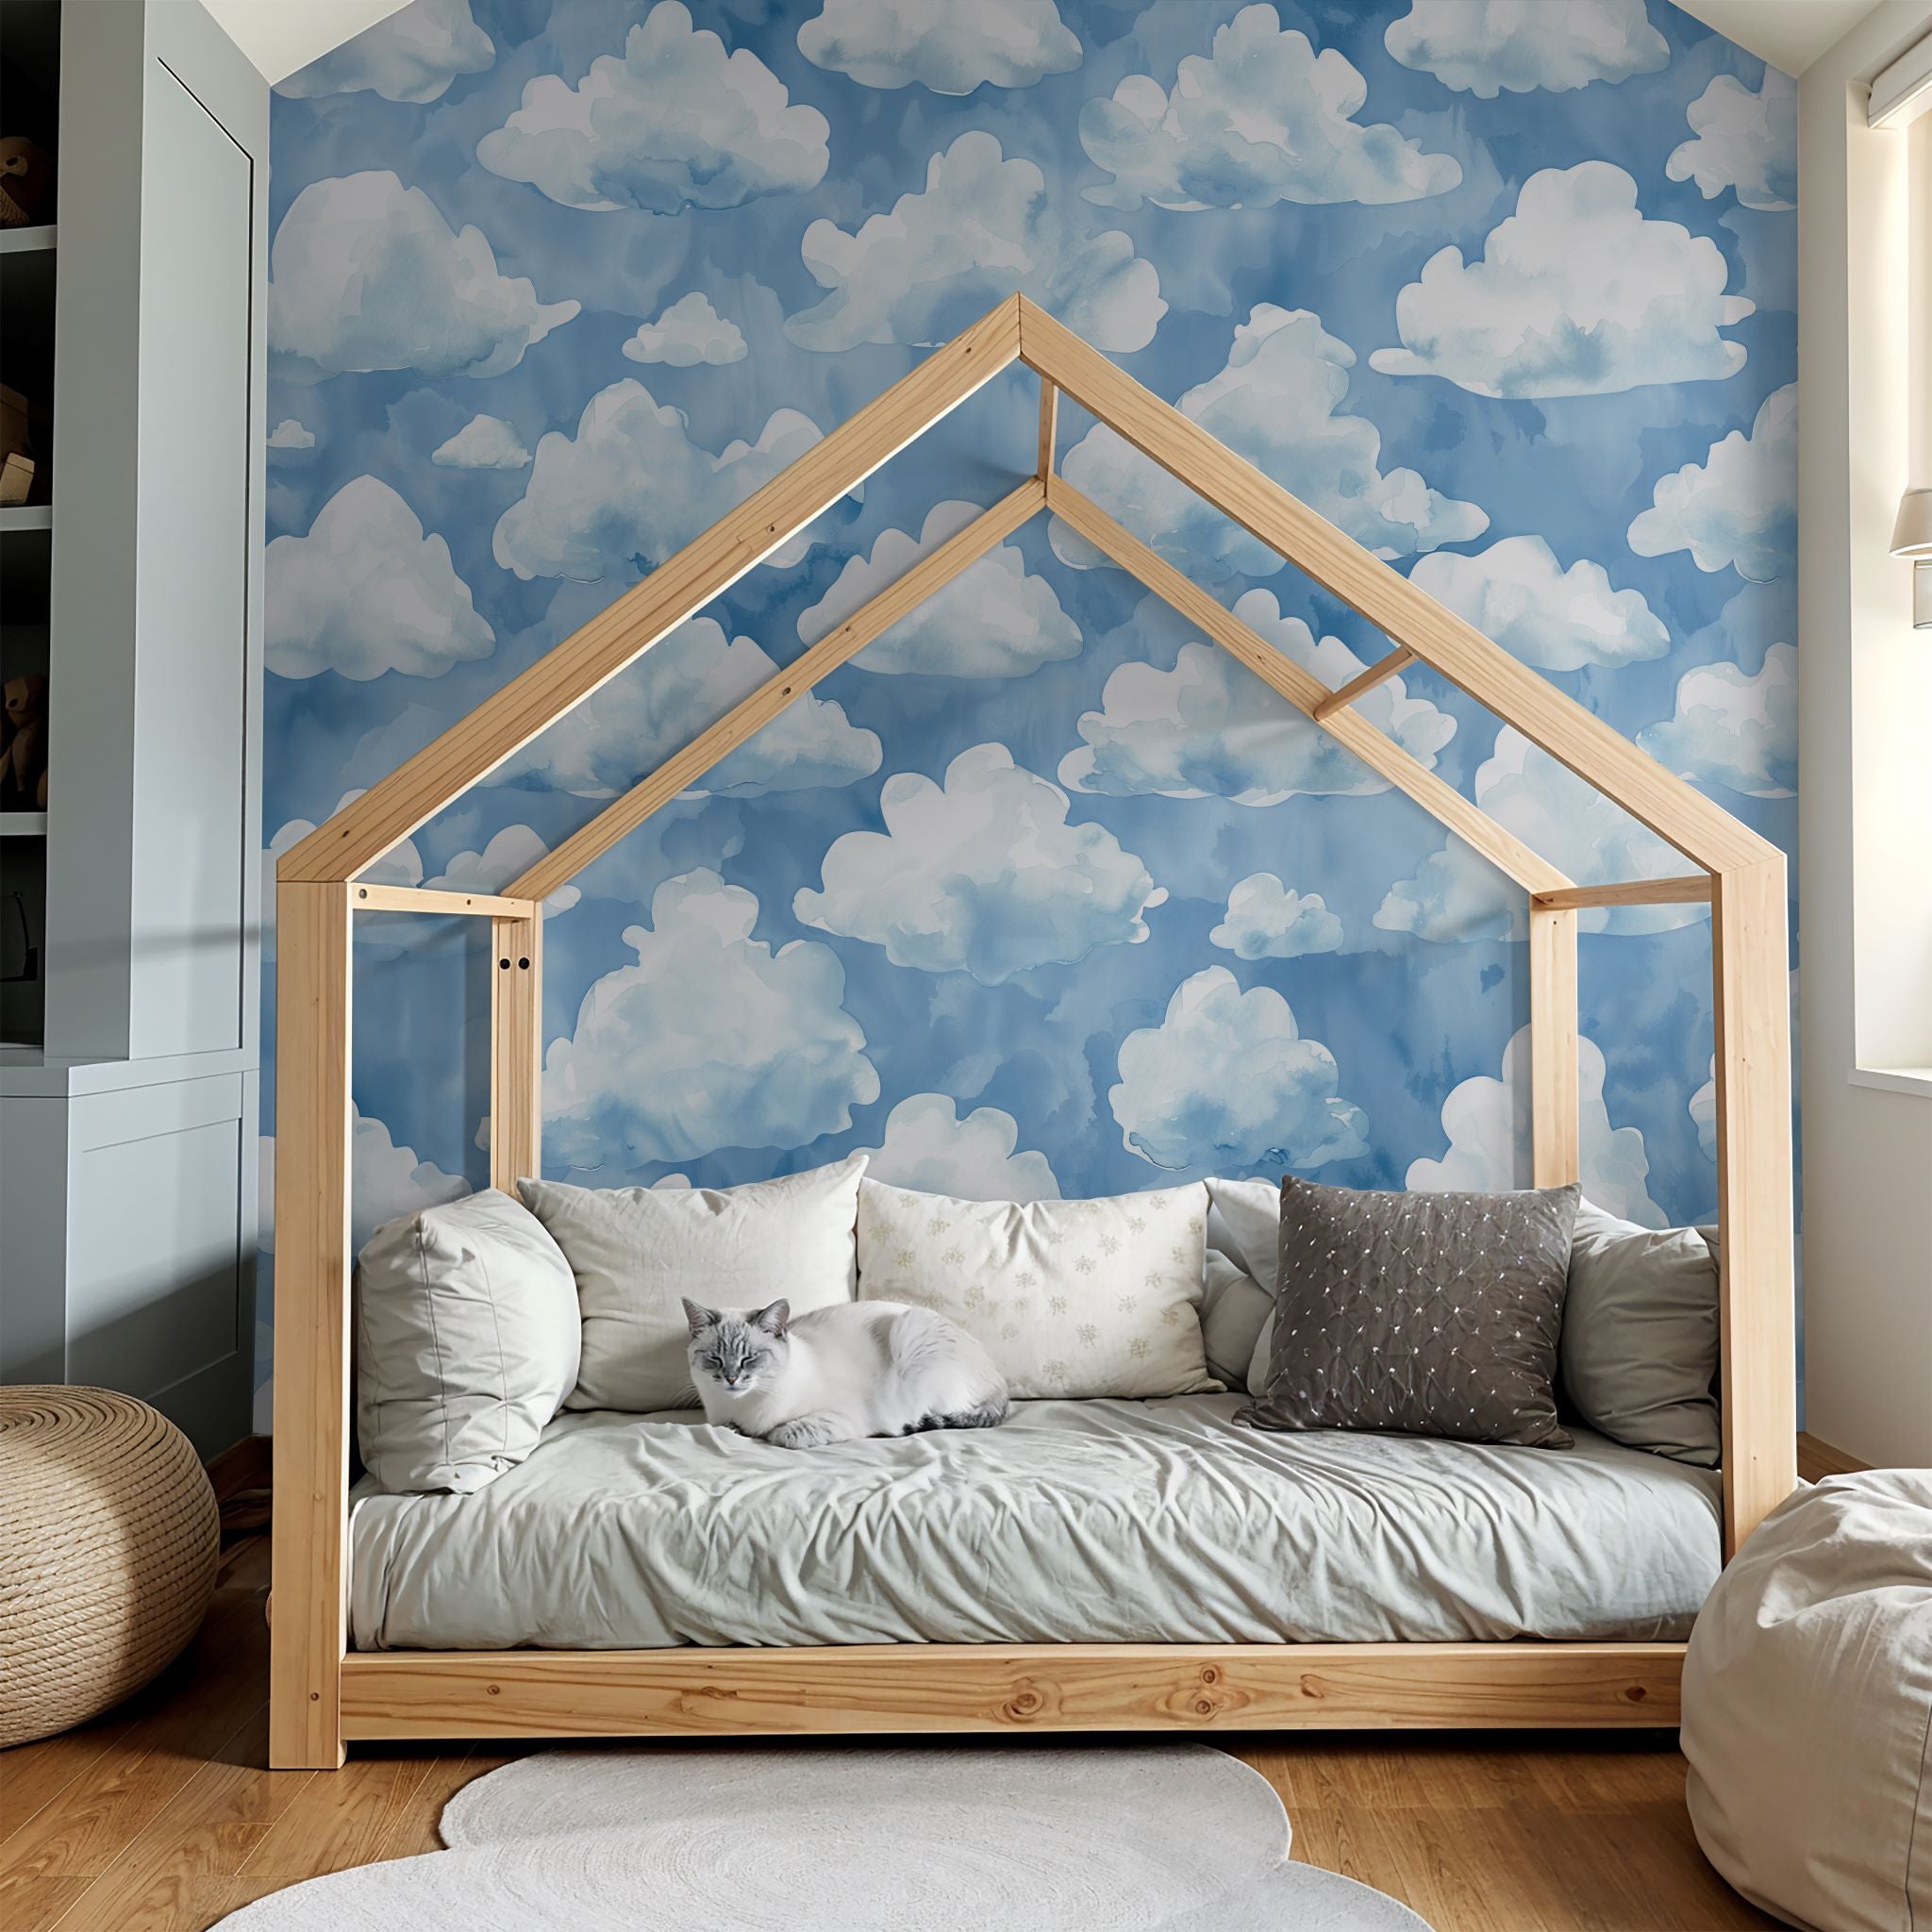 "Cozy children's room featuring 'Azure Dreamland Wallpaper' by Wall Blush with whimsical cloud design."